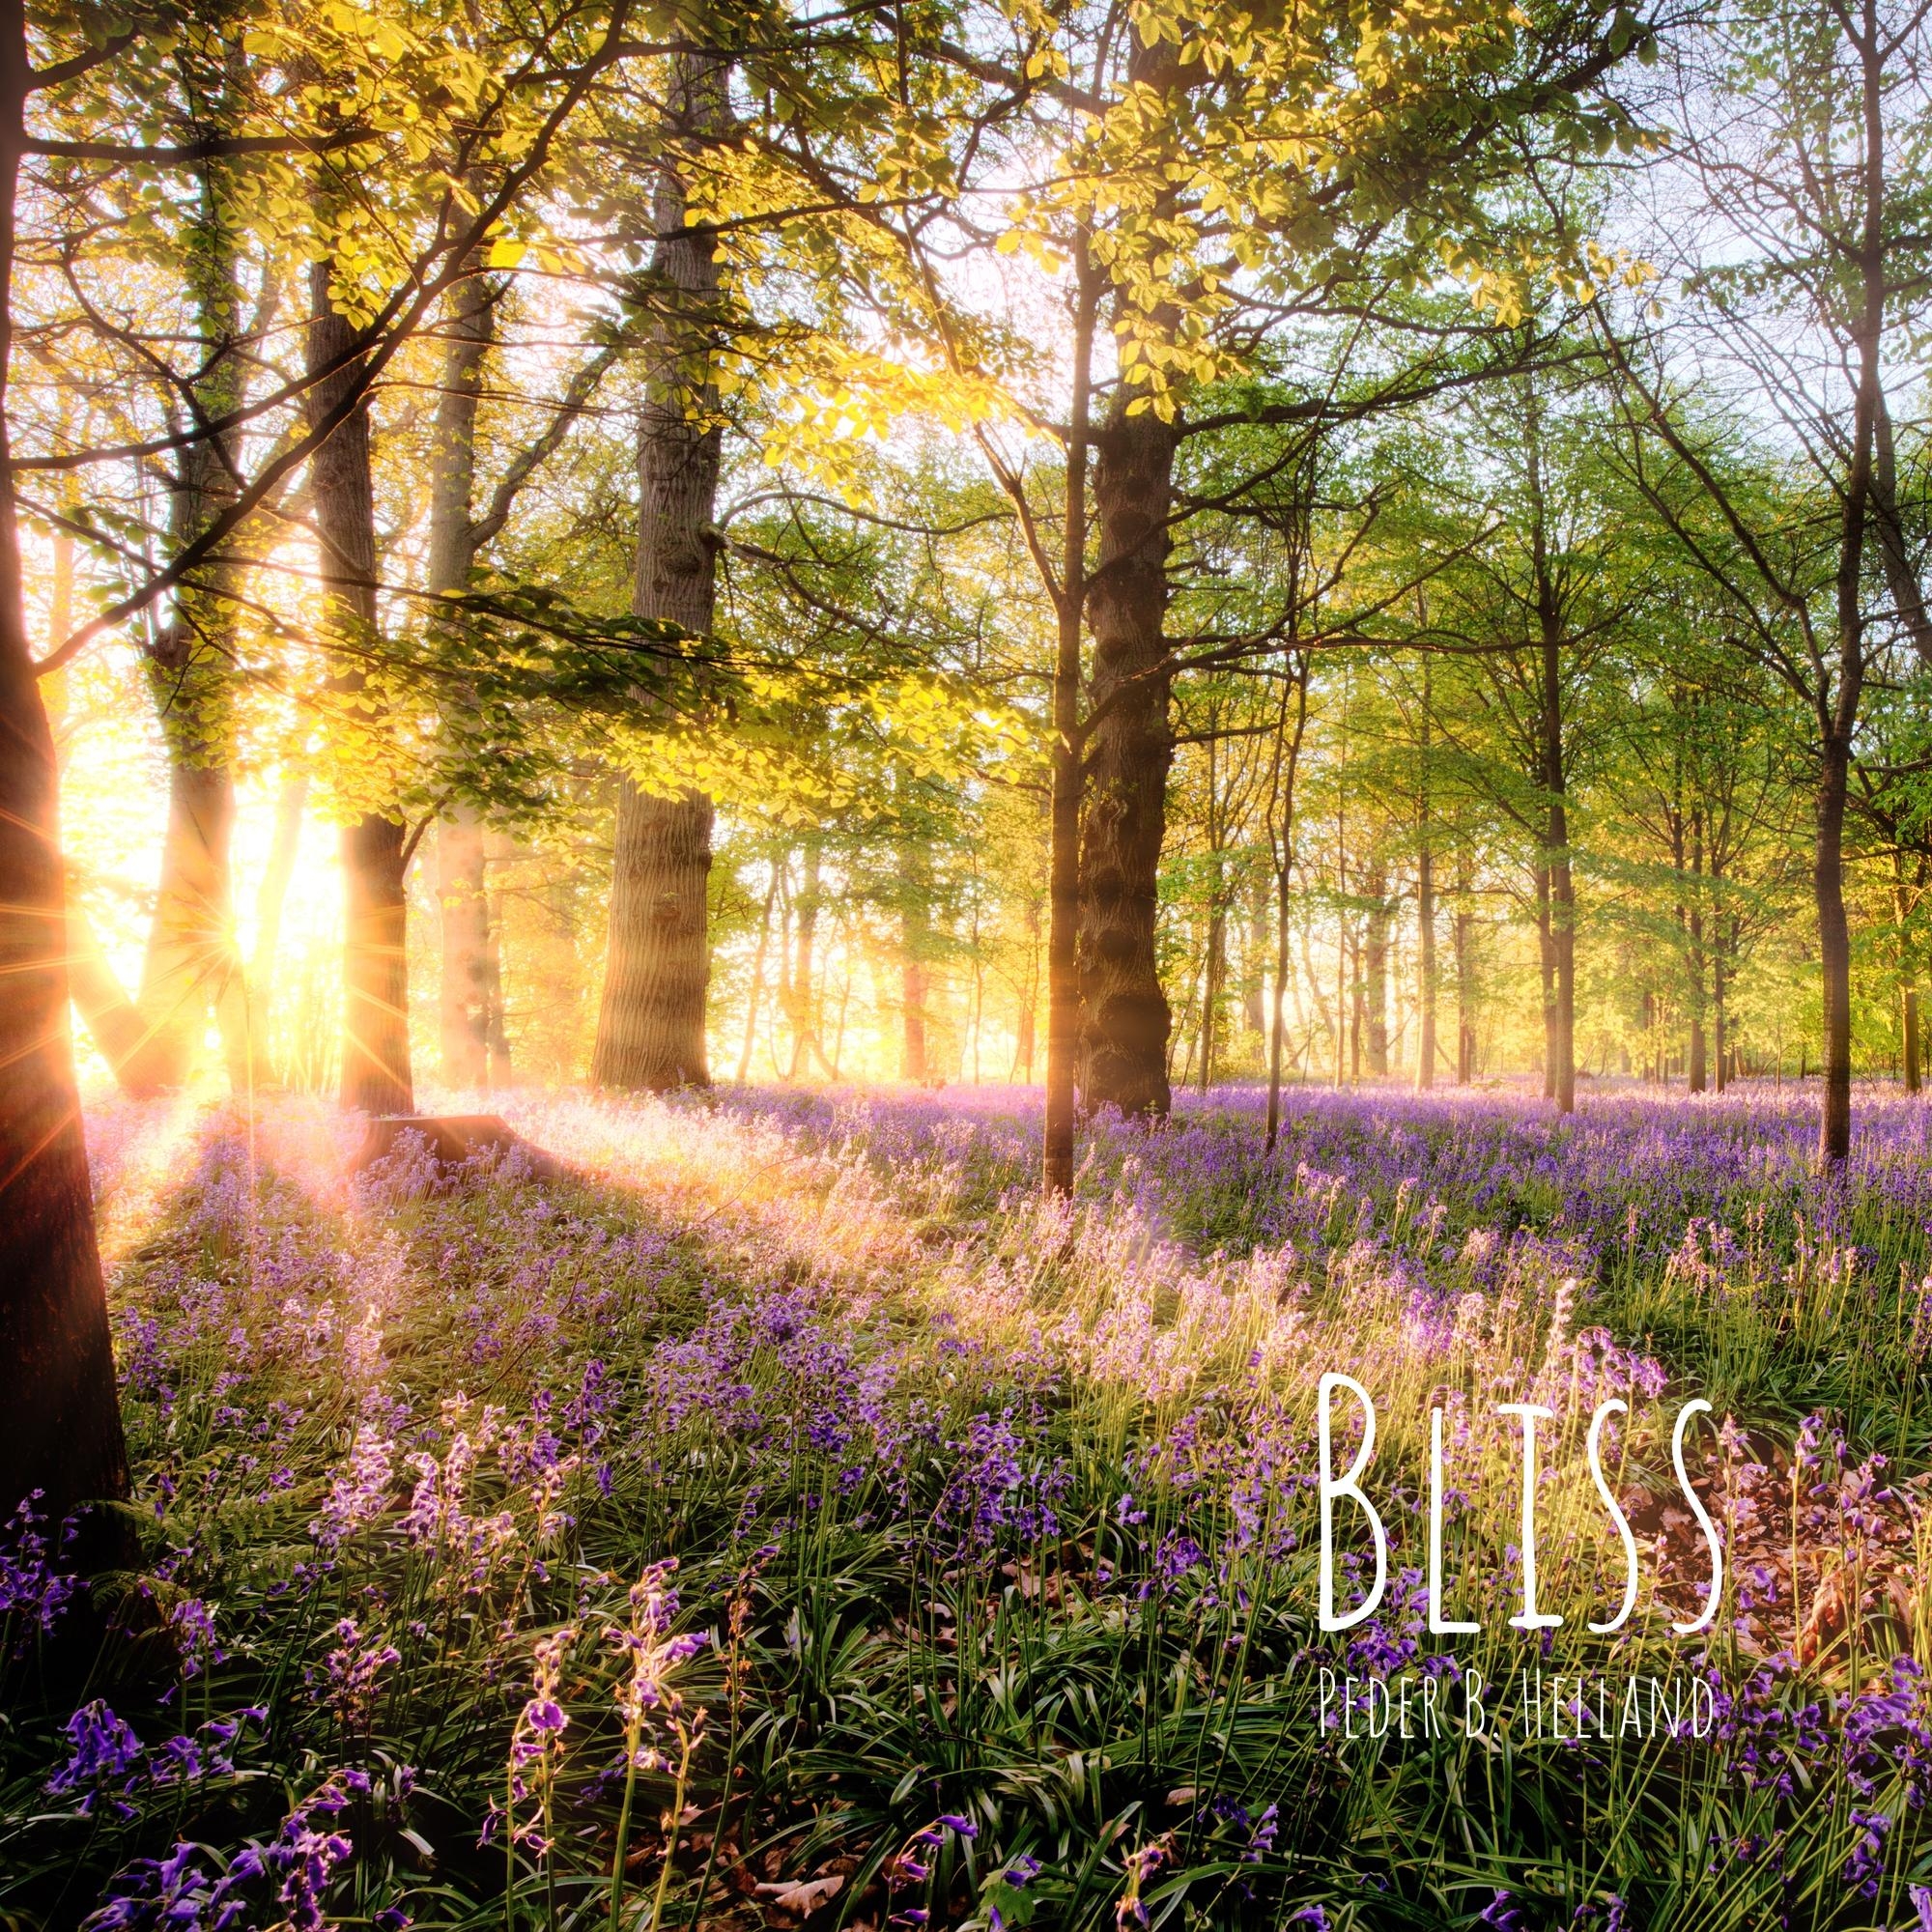 Cover art for the single Bliss by Peder B. Helland